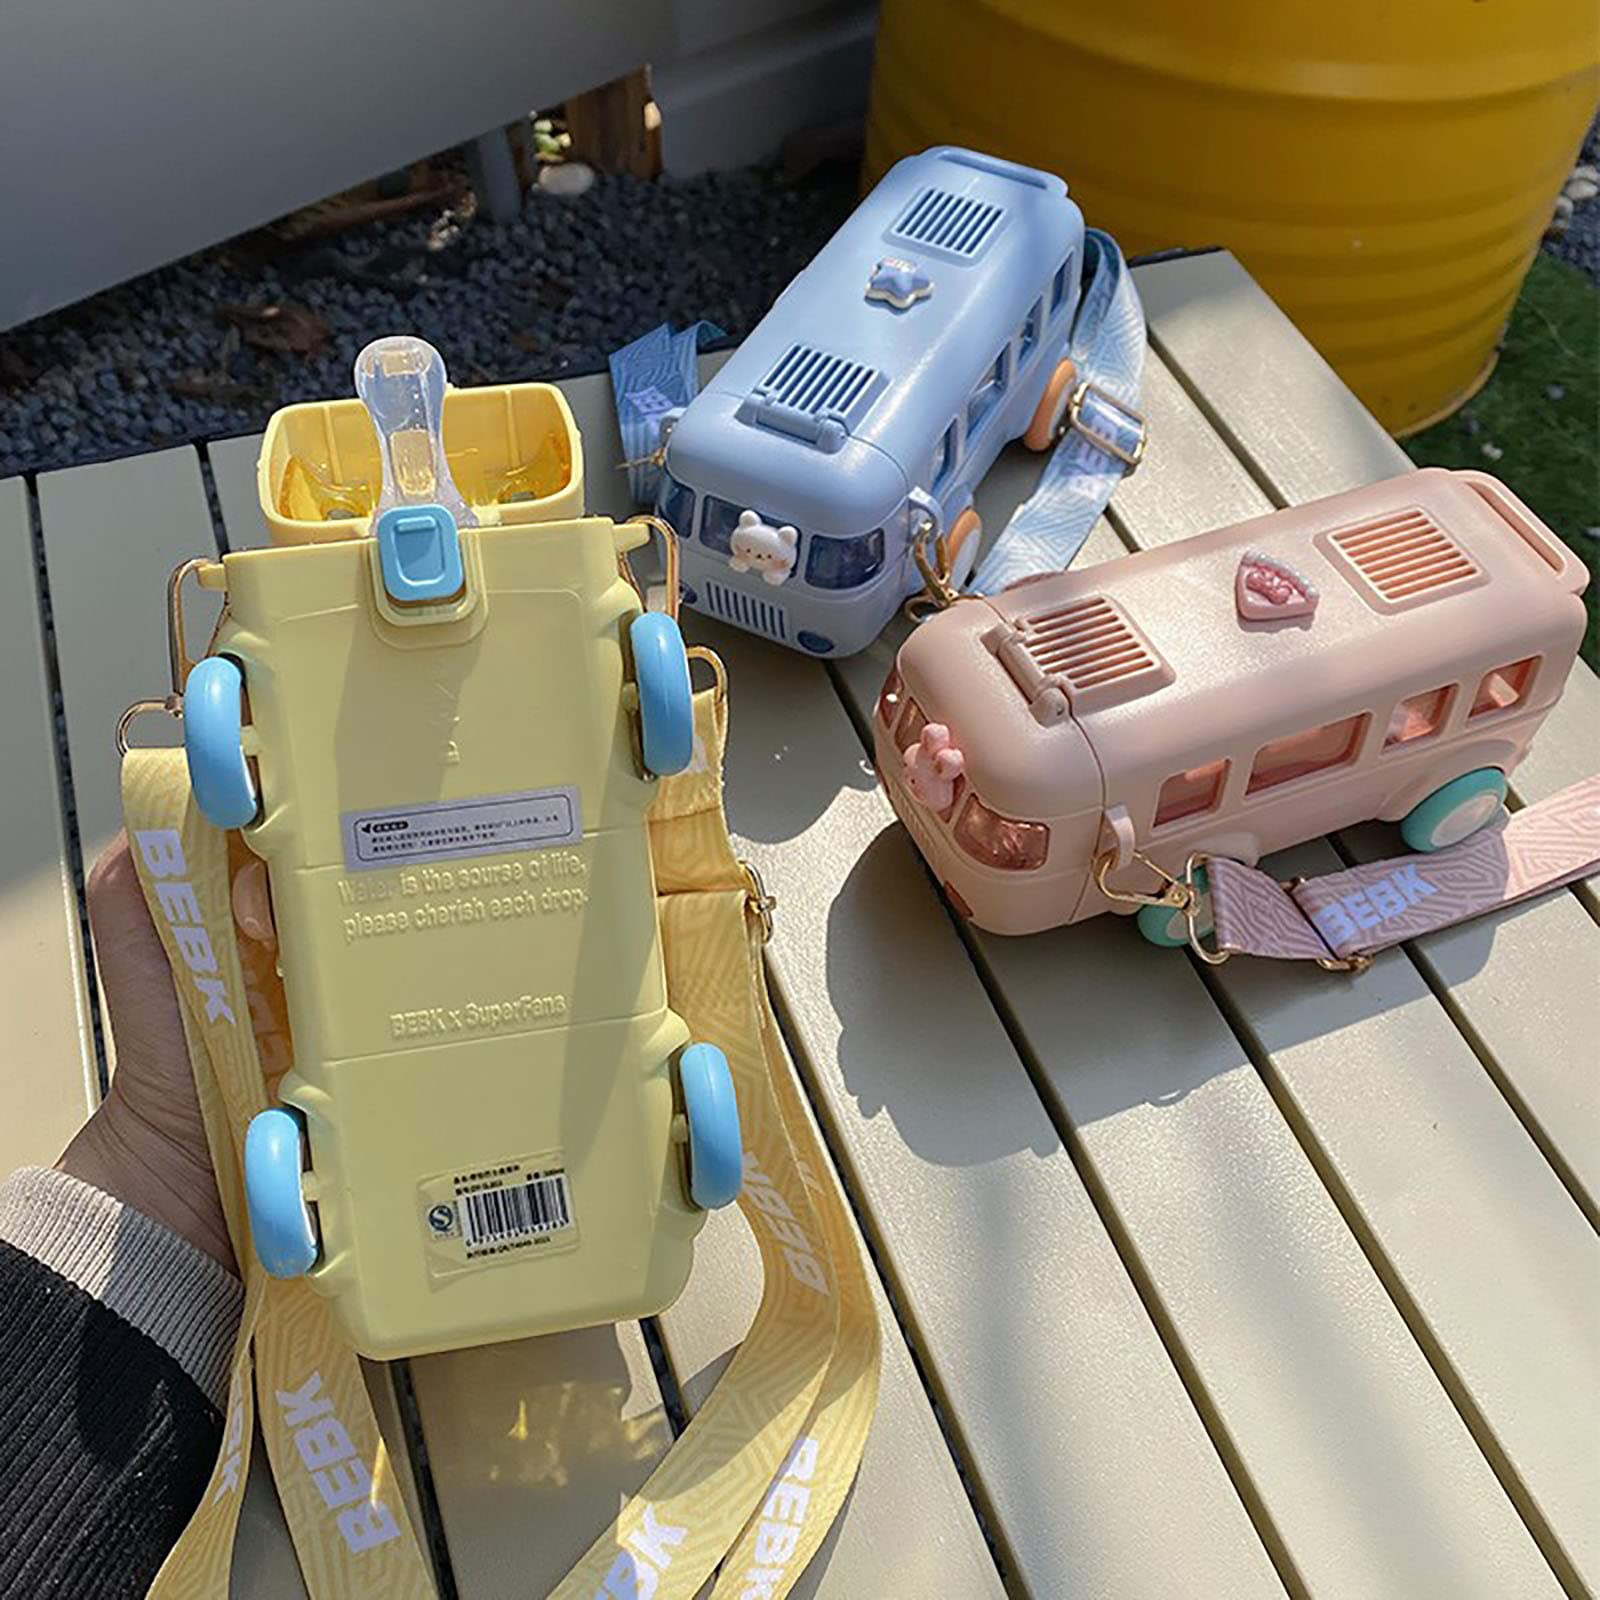 Pink school bus water bottle for my toddler who loves anything